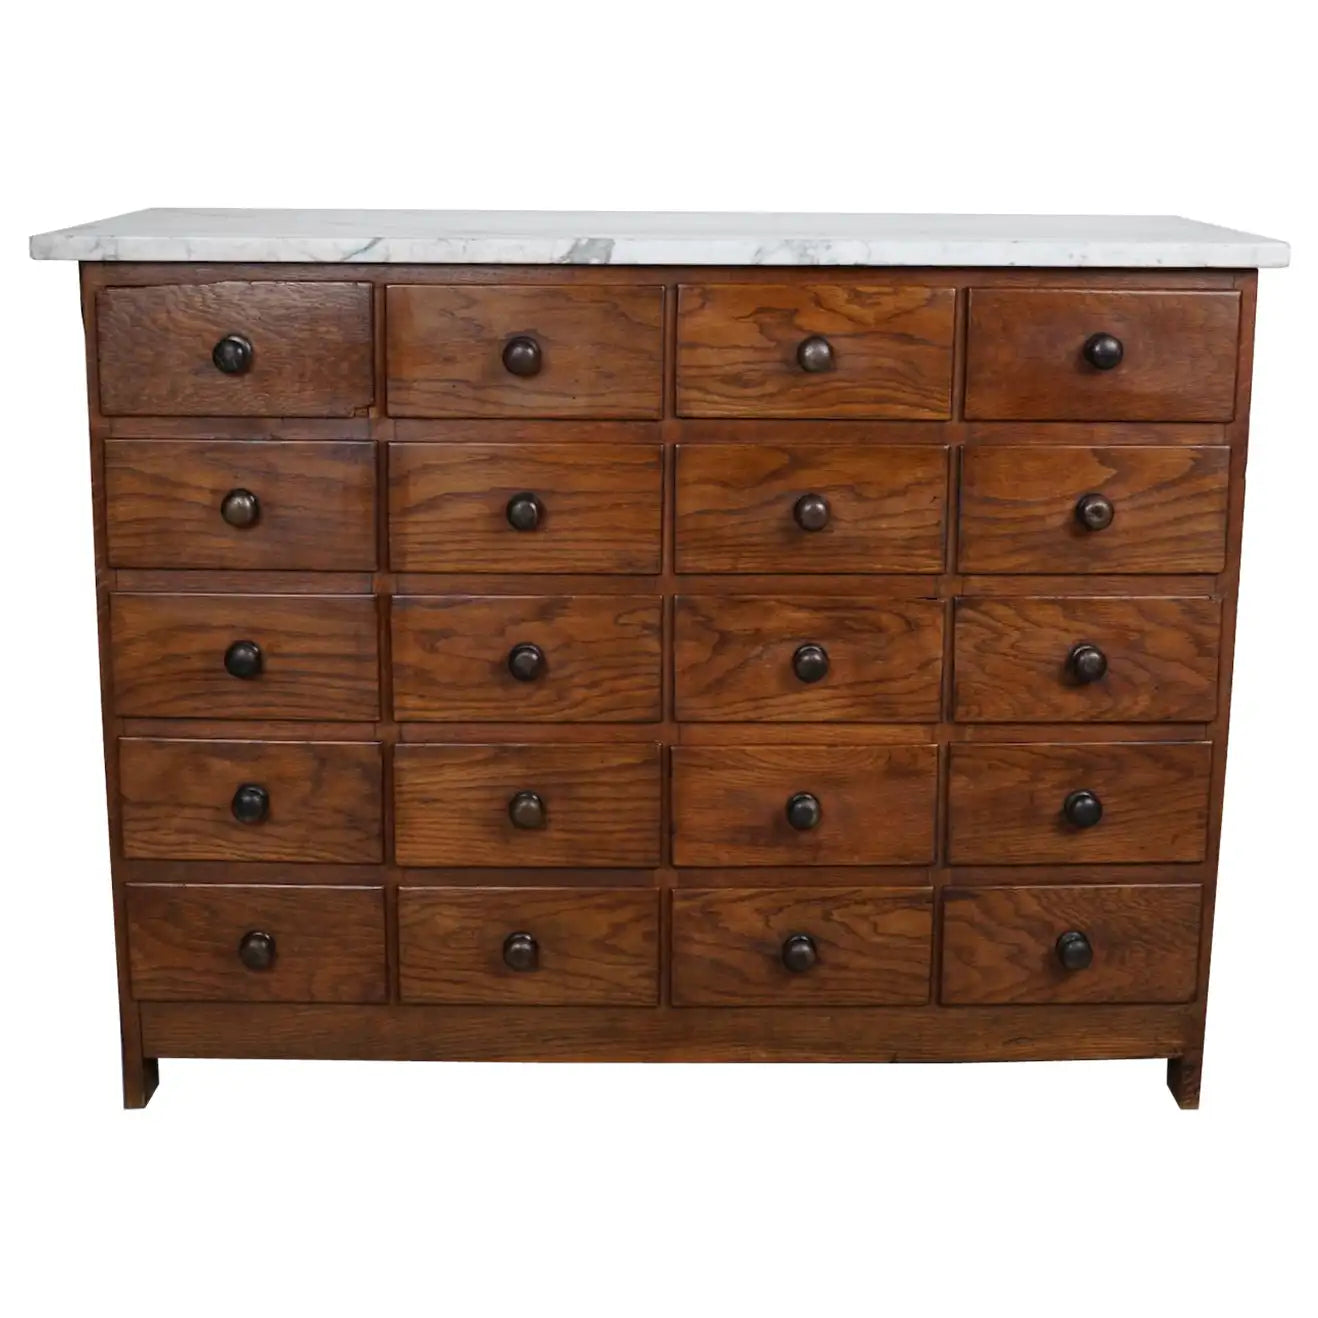 Dutch Oak Apothecary / Barber Cabinet Marble Top, Early 20th Century